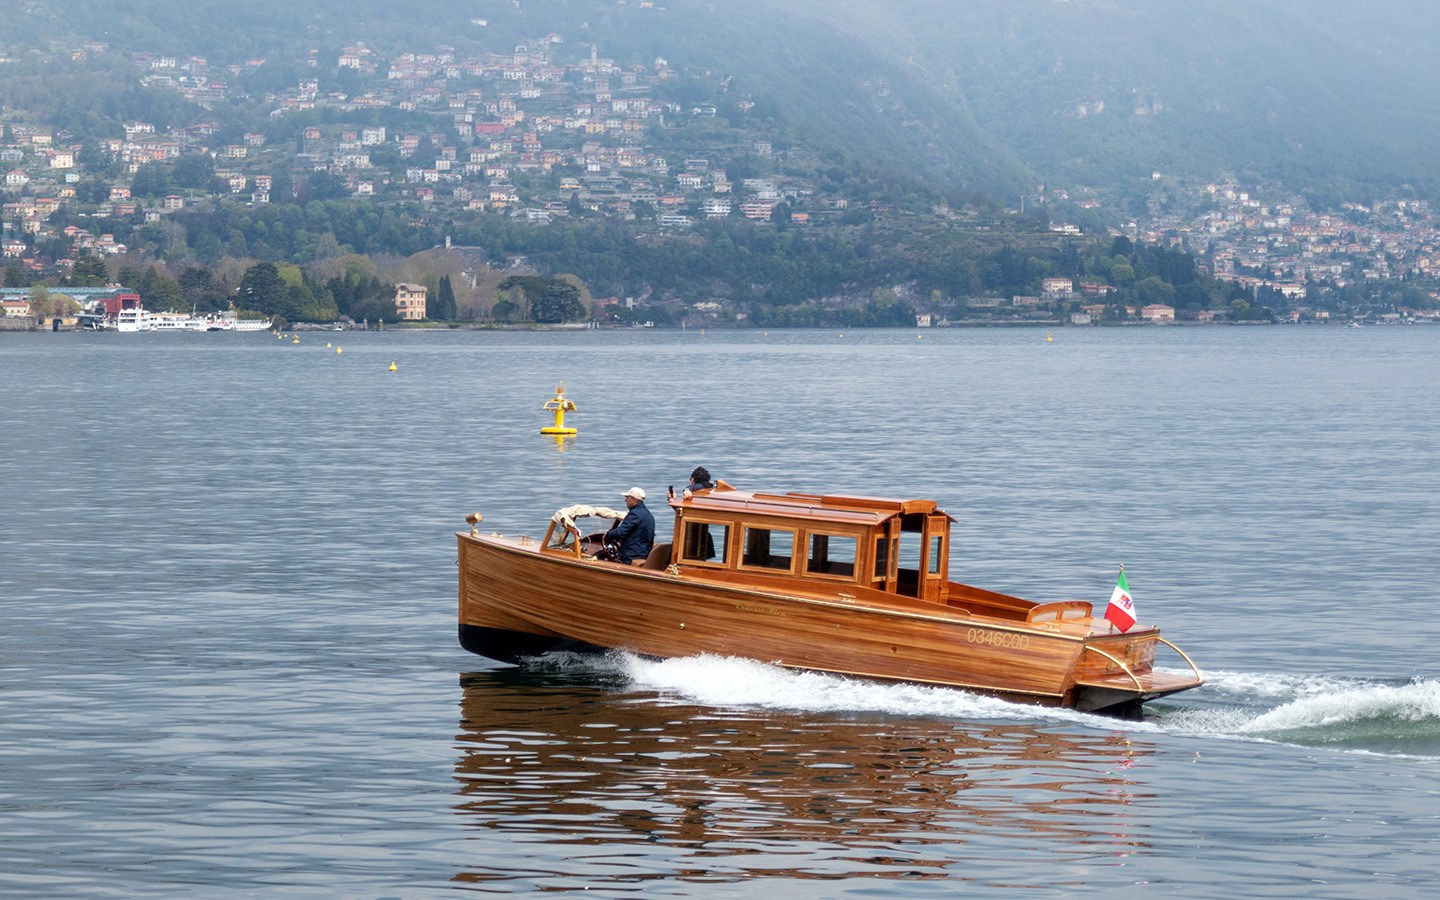 A classic wooden Riva speedboat on the lake